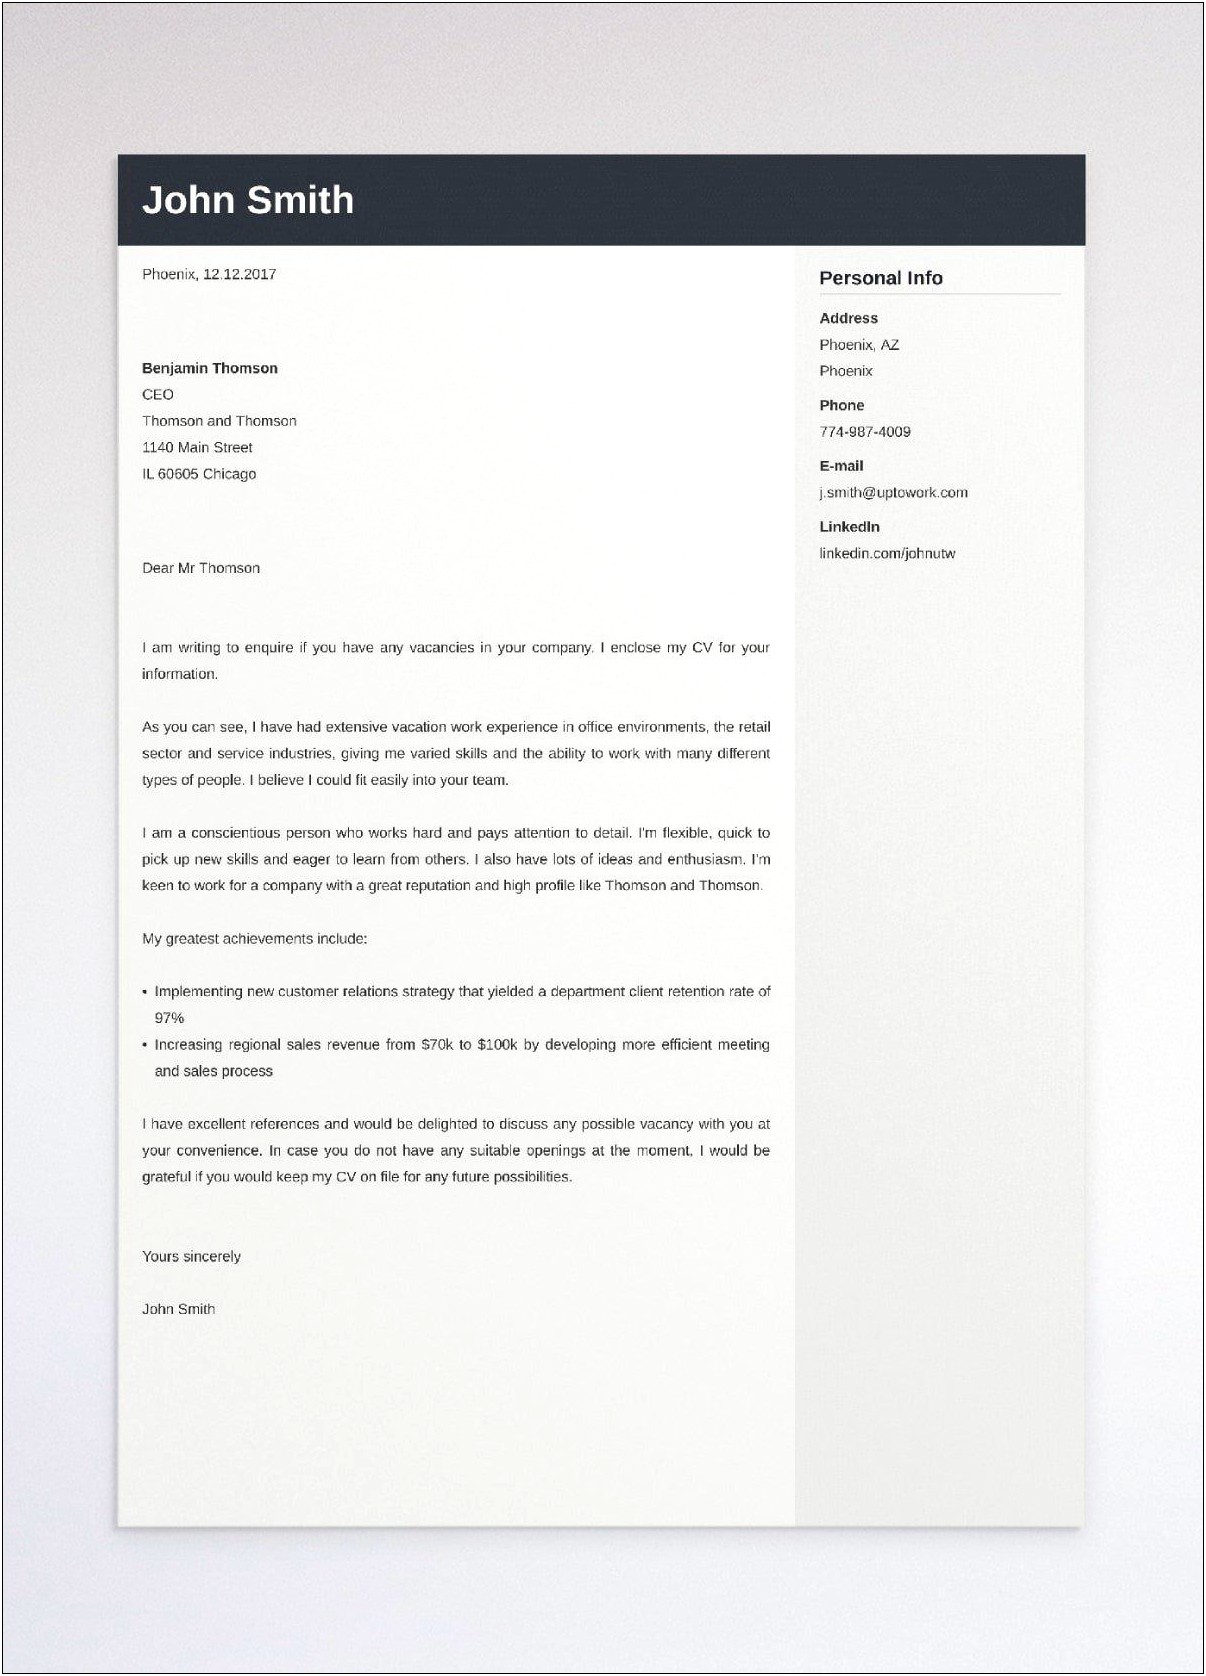 Attach Resume Separatly Or With Cover Letter